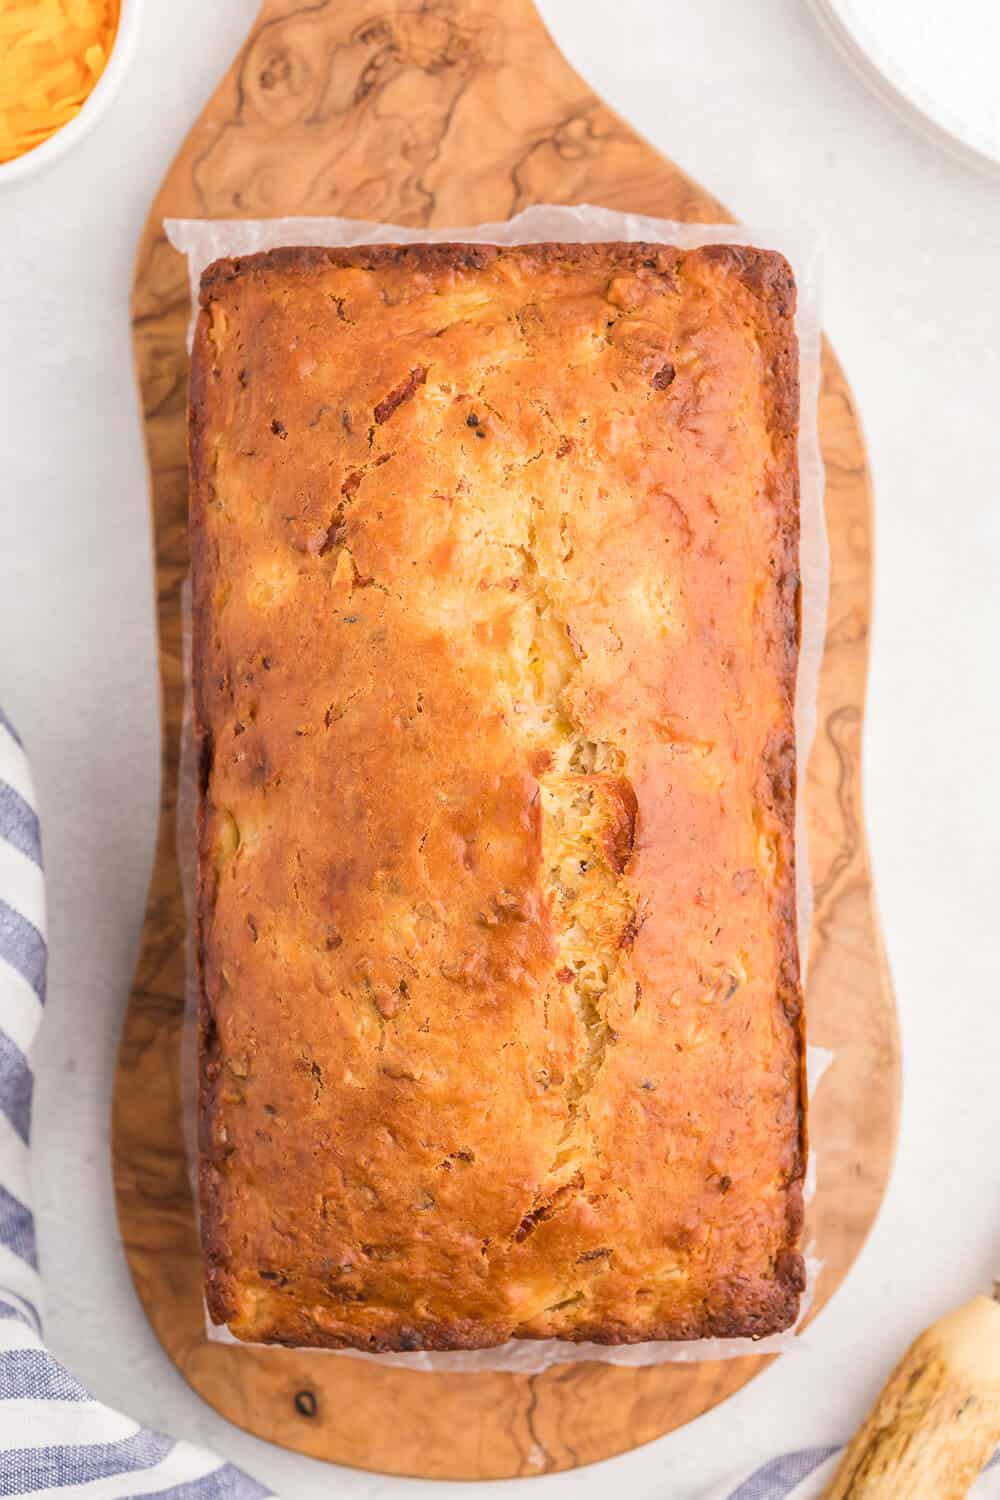 Pineapple Cheese Bread - This quick bread recipe reminds me of a Pineapple Cheese Salad my great grandmother used to make. 